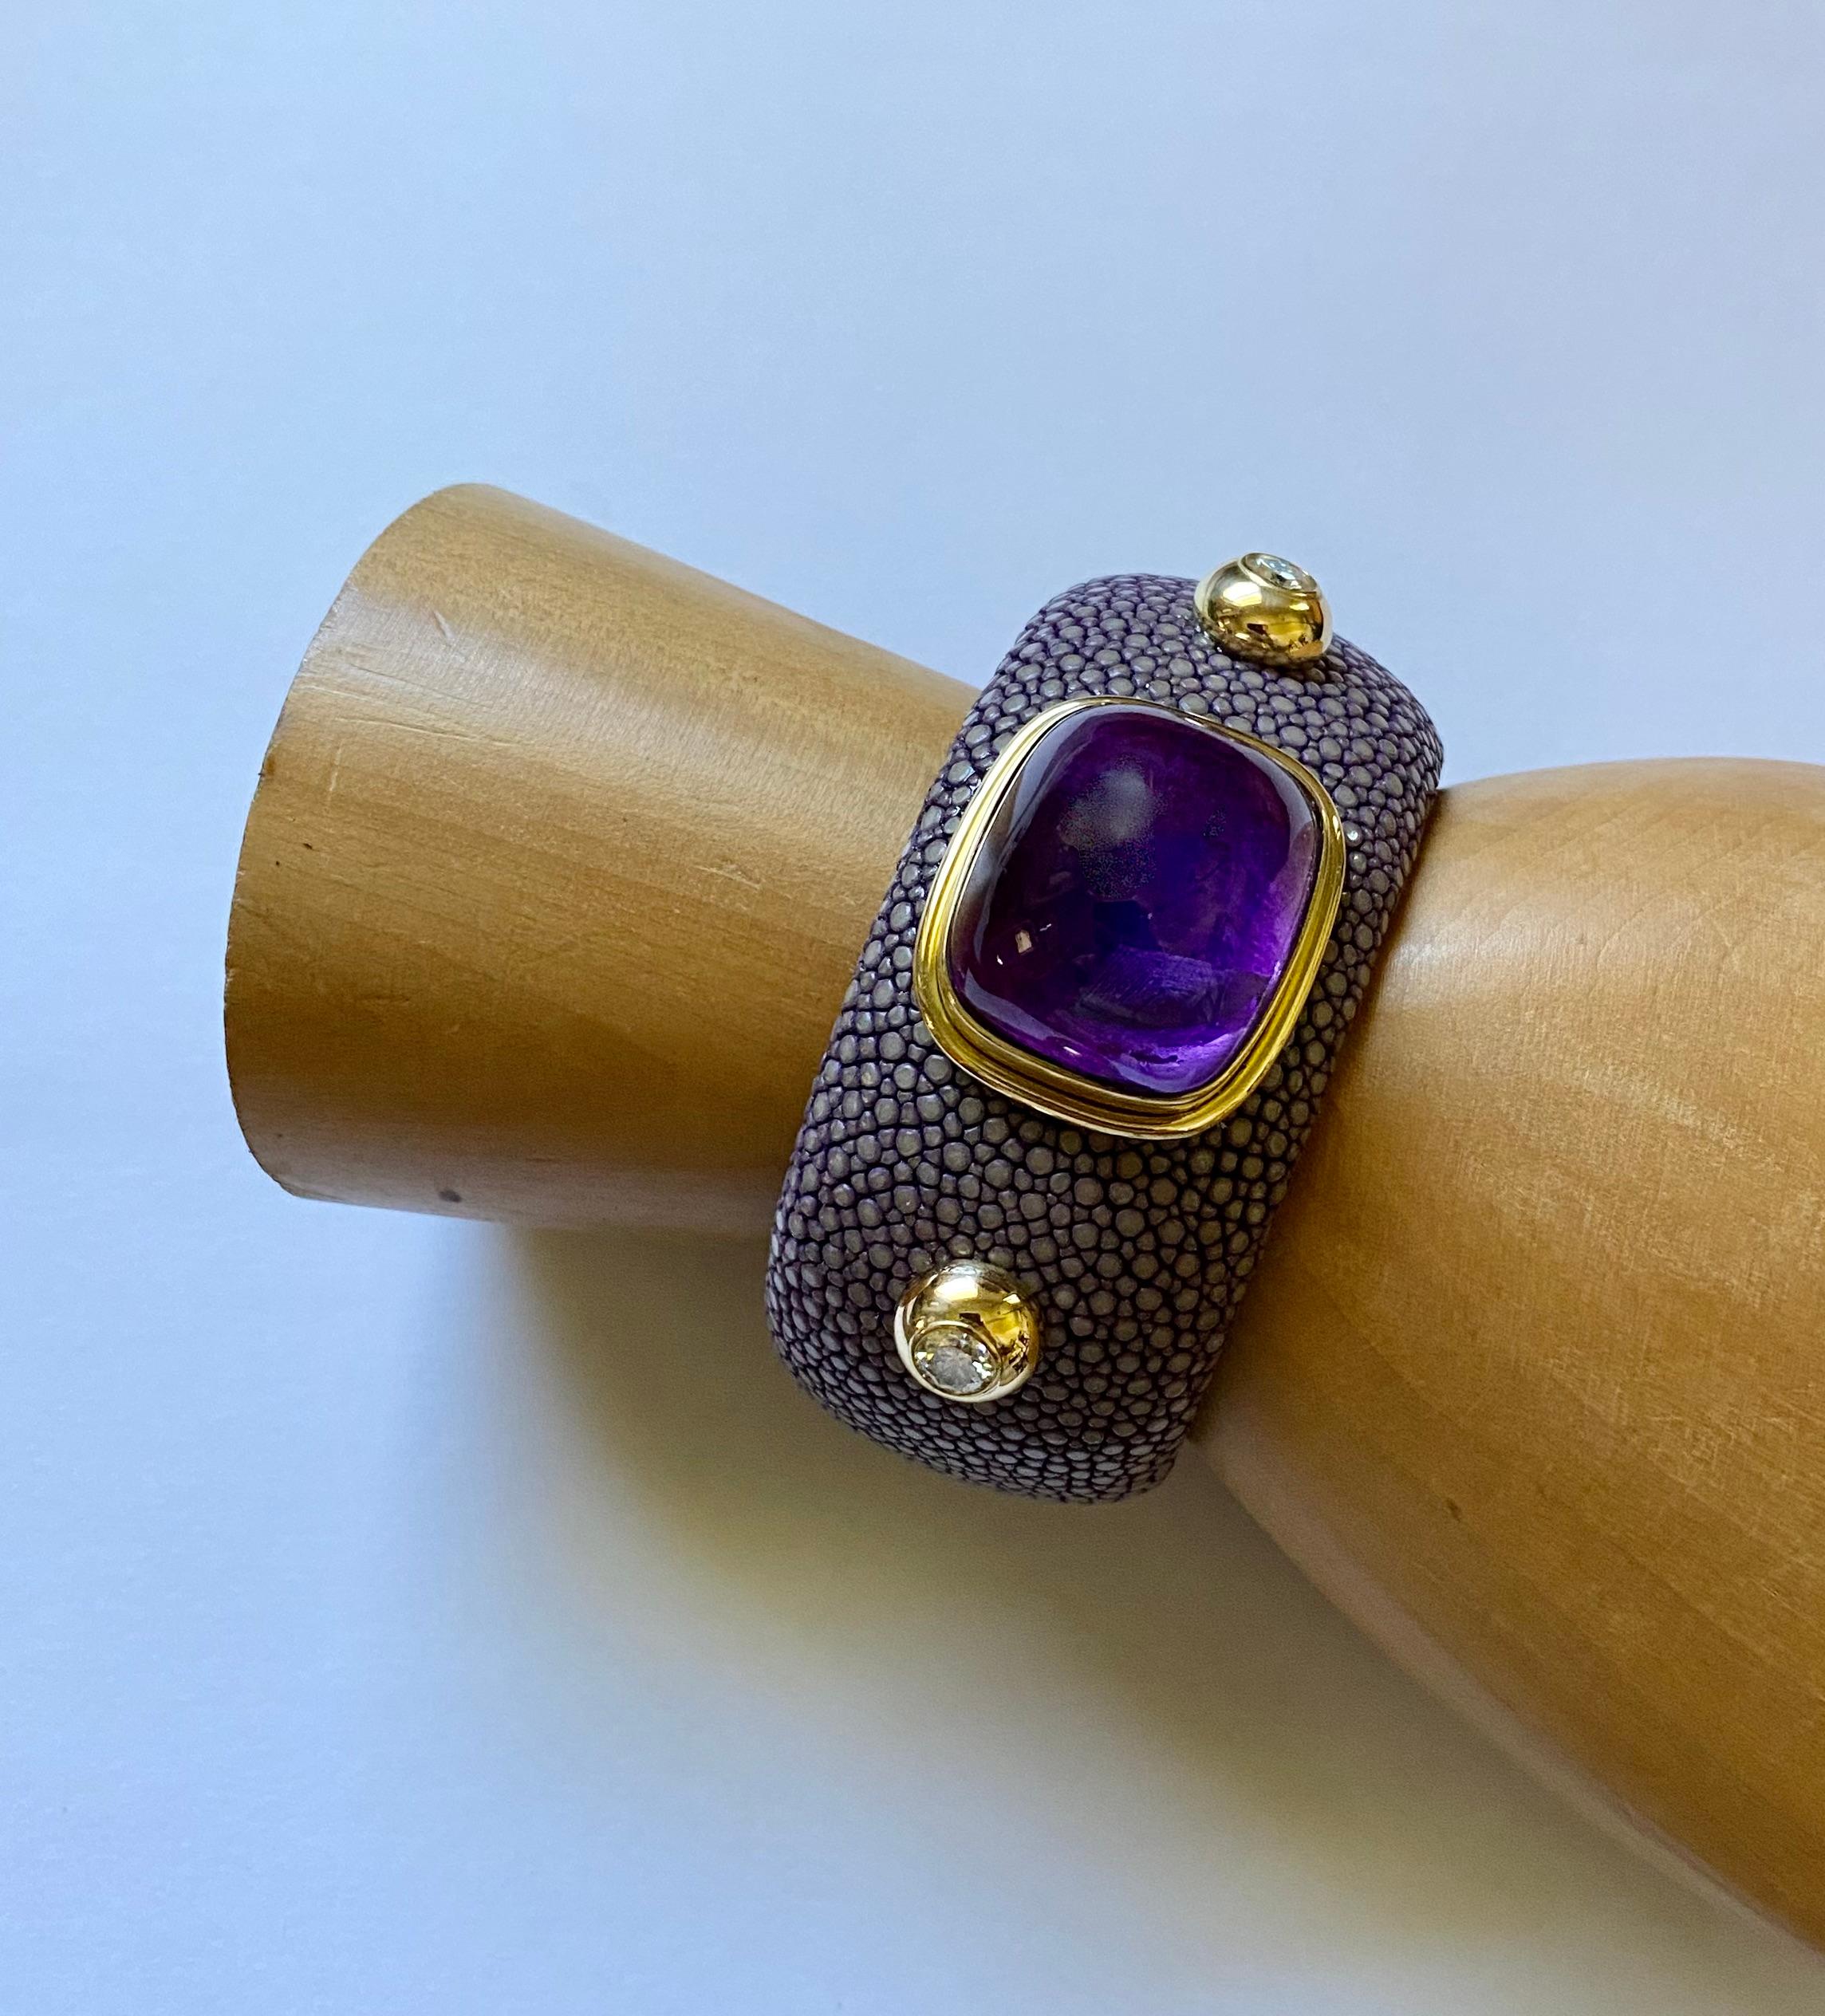 Cabochon amethyst is the centerpiece of this dramatic cuff bracelet.  The amethyst (origin: Brazil) weighs 36.70 carats.  The gem is cut as a high cushion shape dome, and is well polished.  It is set within an 18k yellow gold bezel.  Flanking the